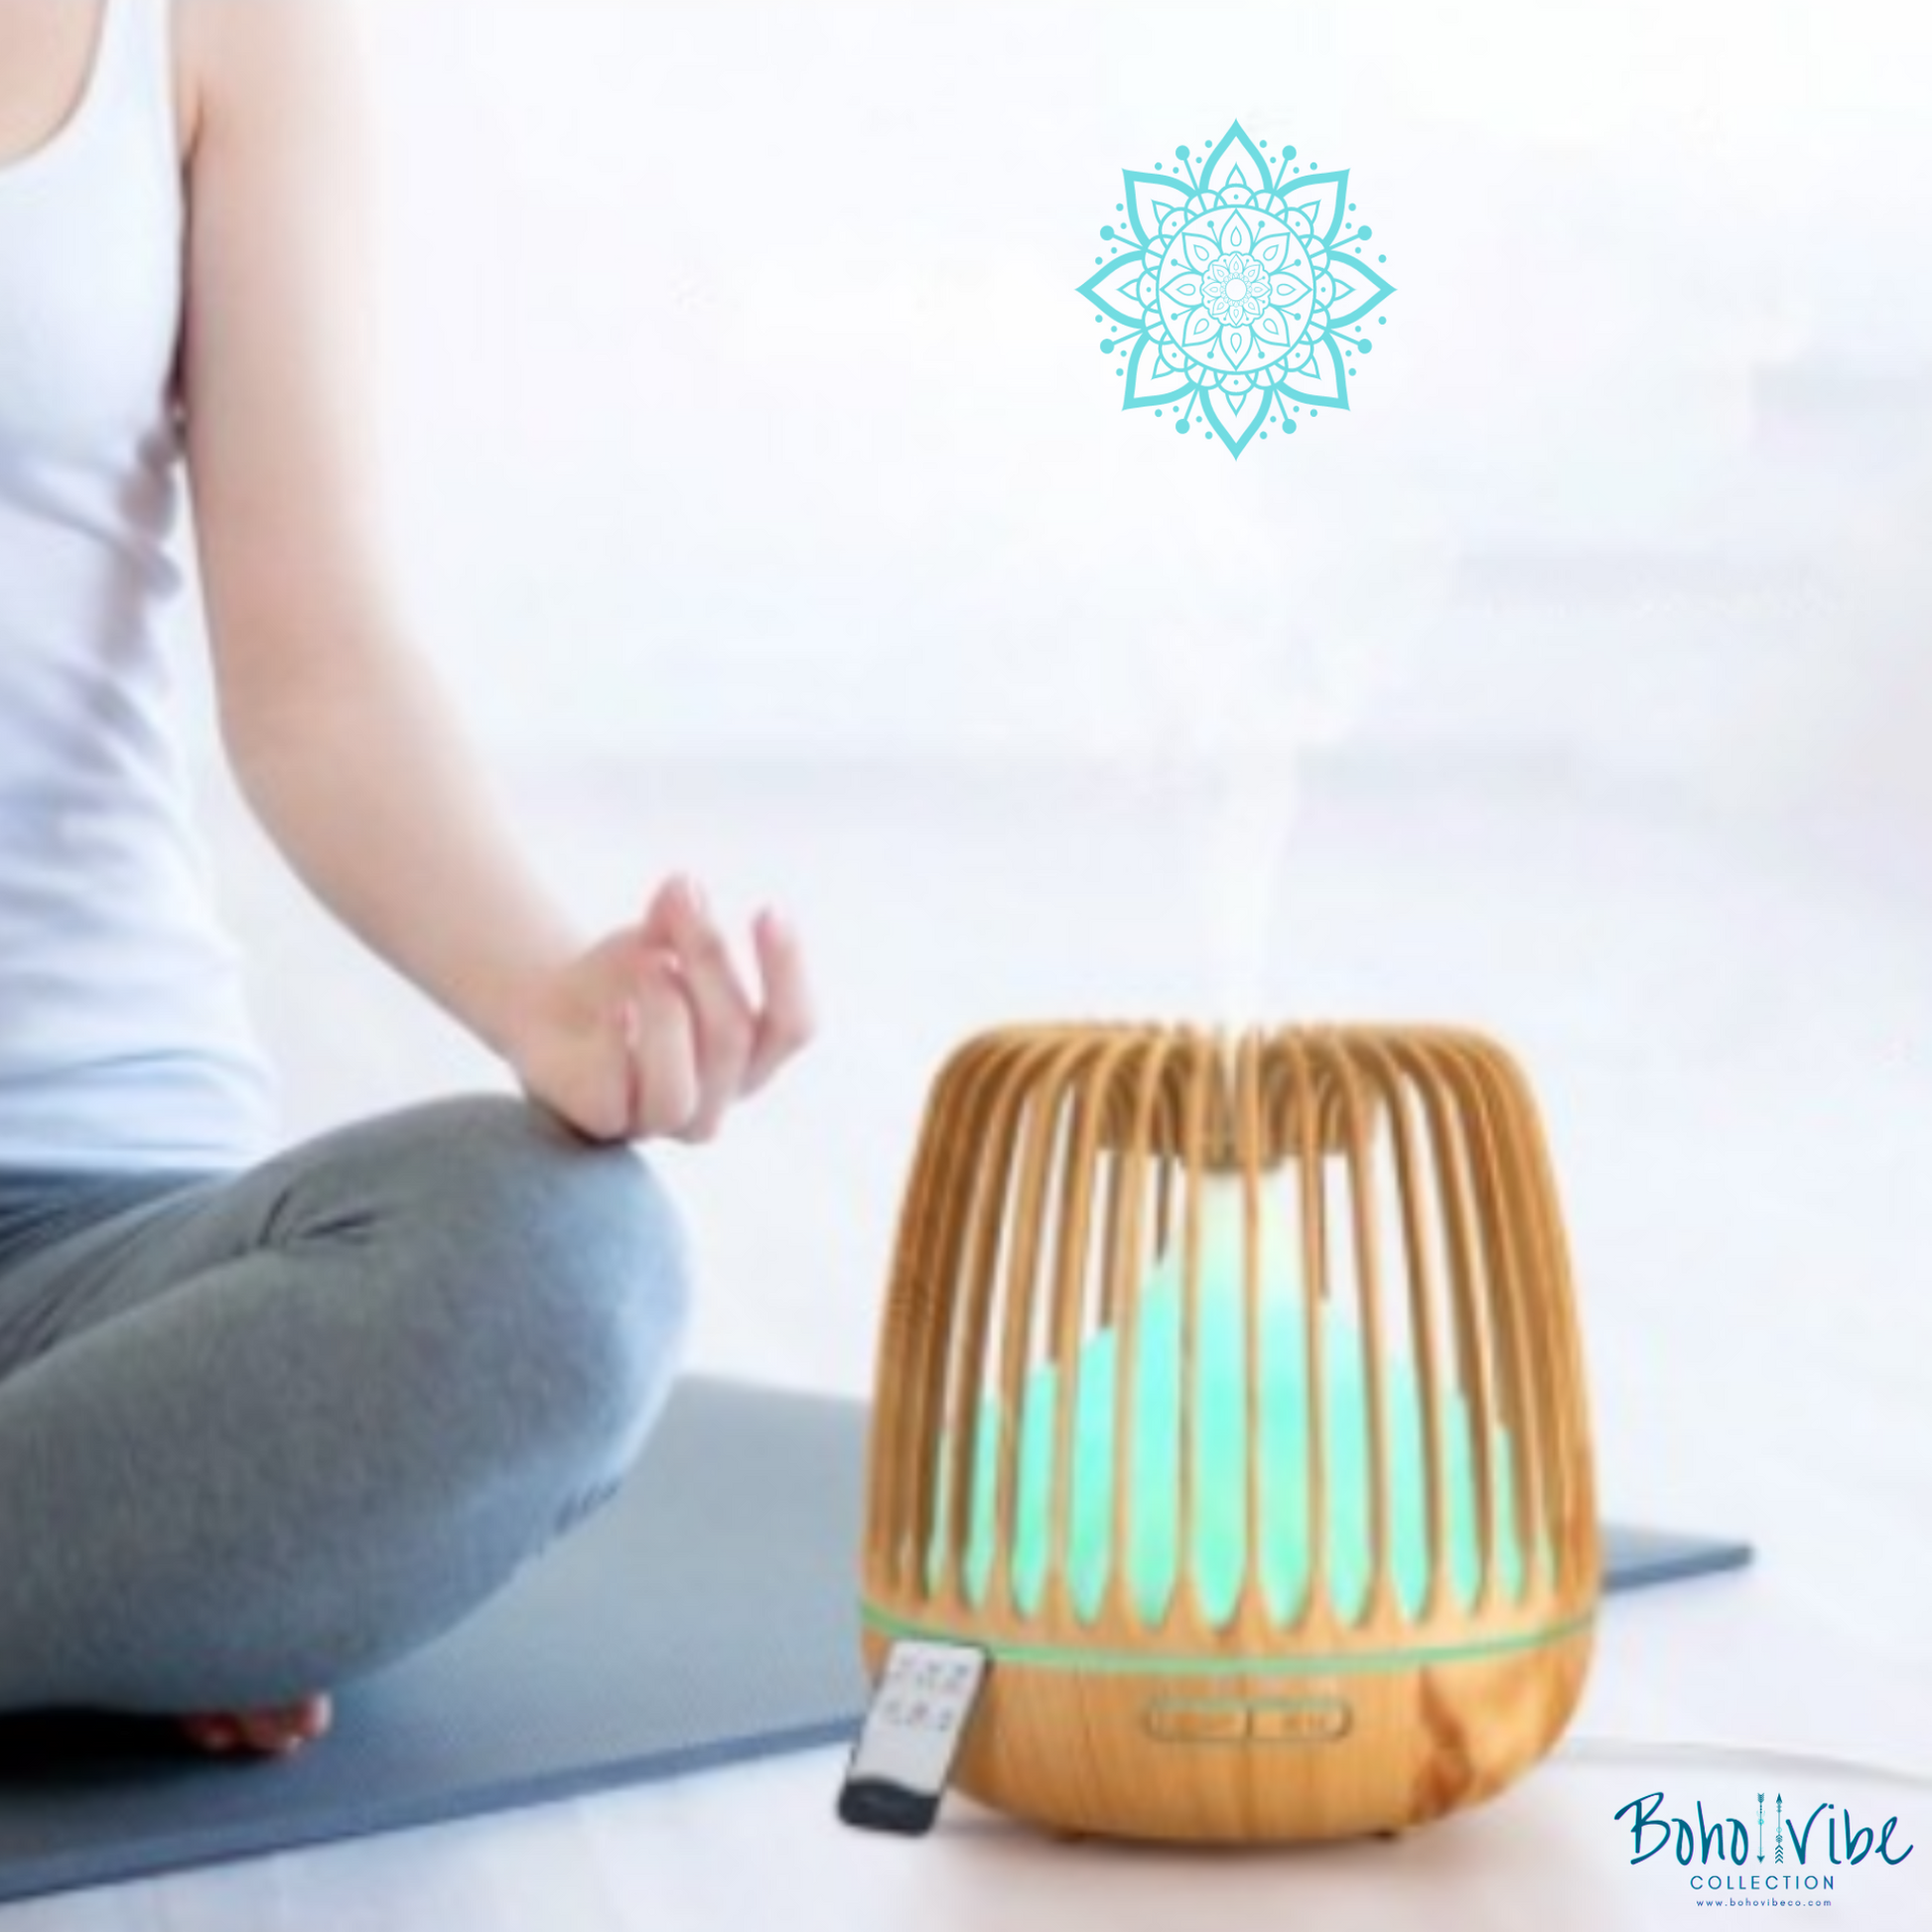 Boho ↡↟ Vibe Collection ↠ Multi-Functional Aroma Diffuser Humidifier Essential Oil Burner with LED Night Light